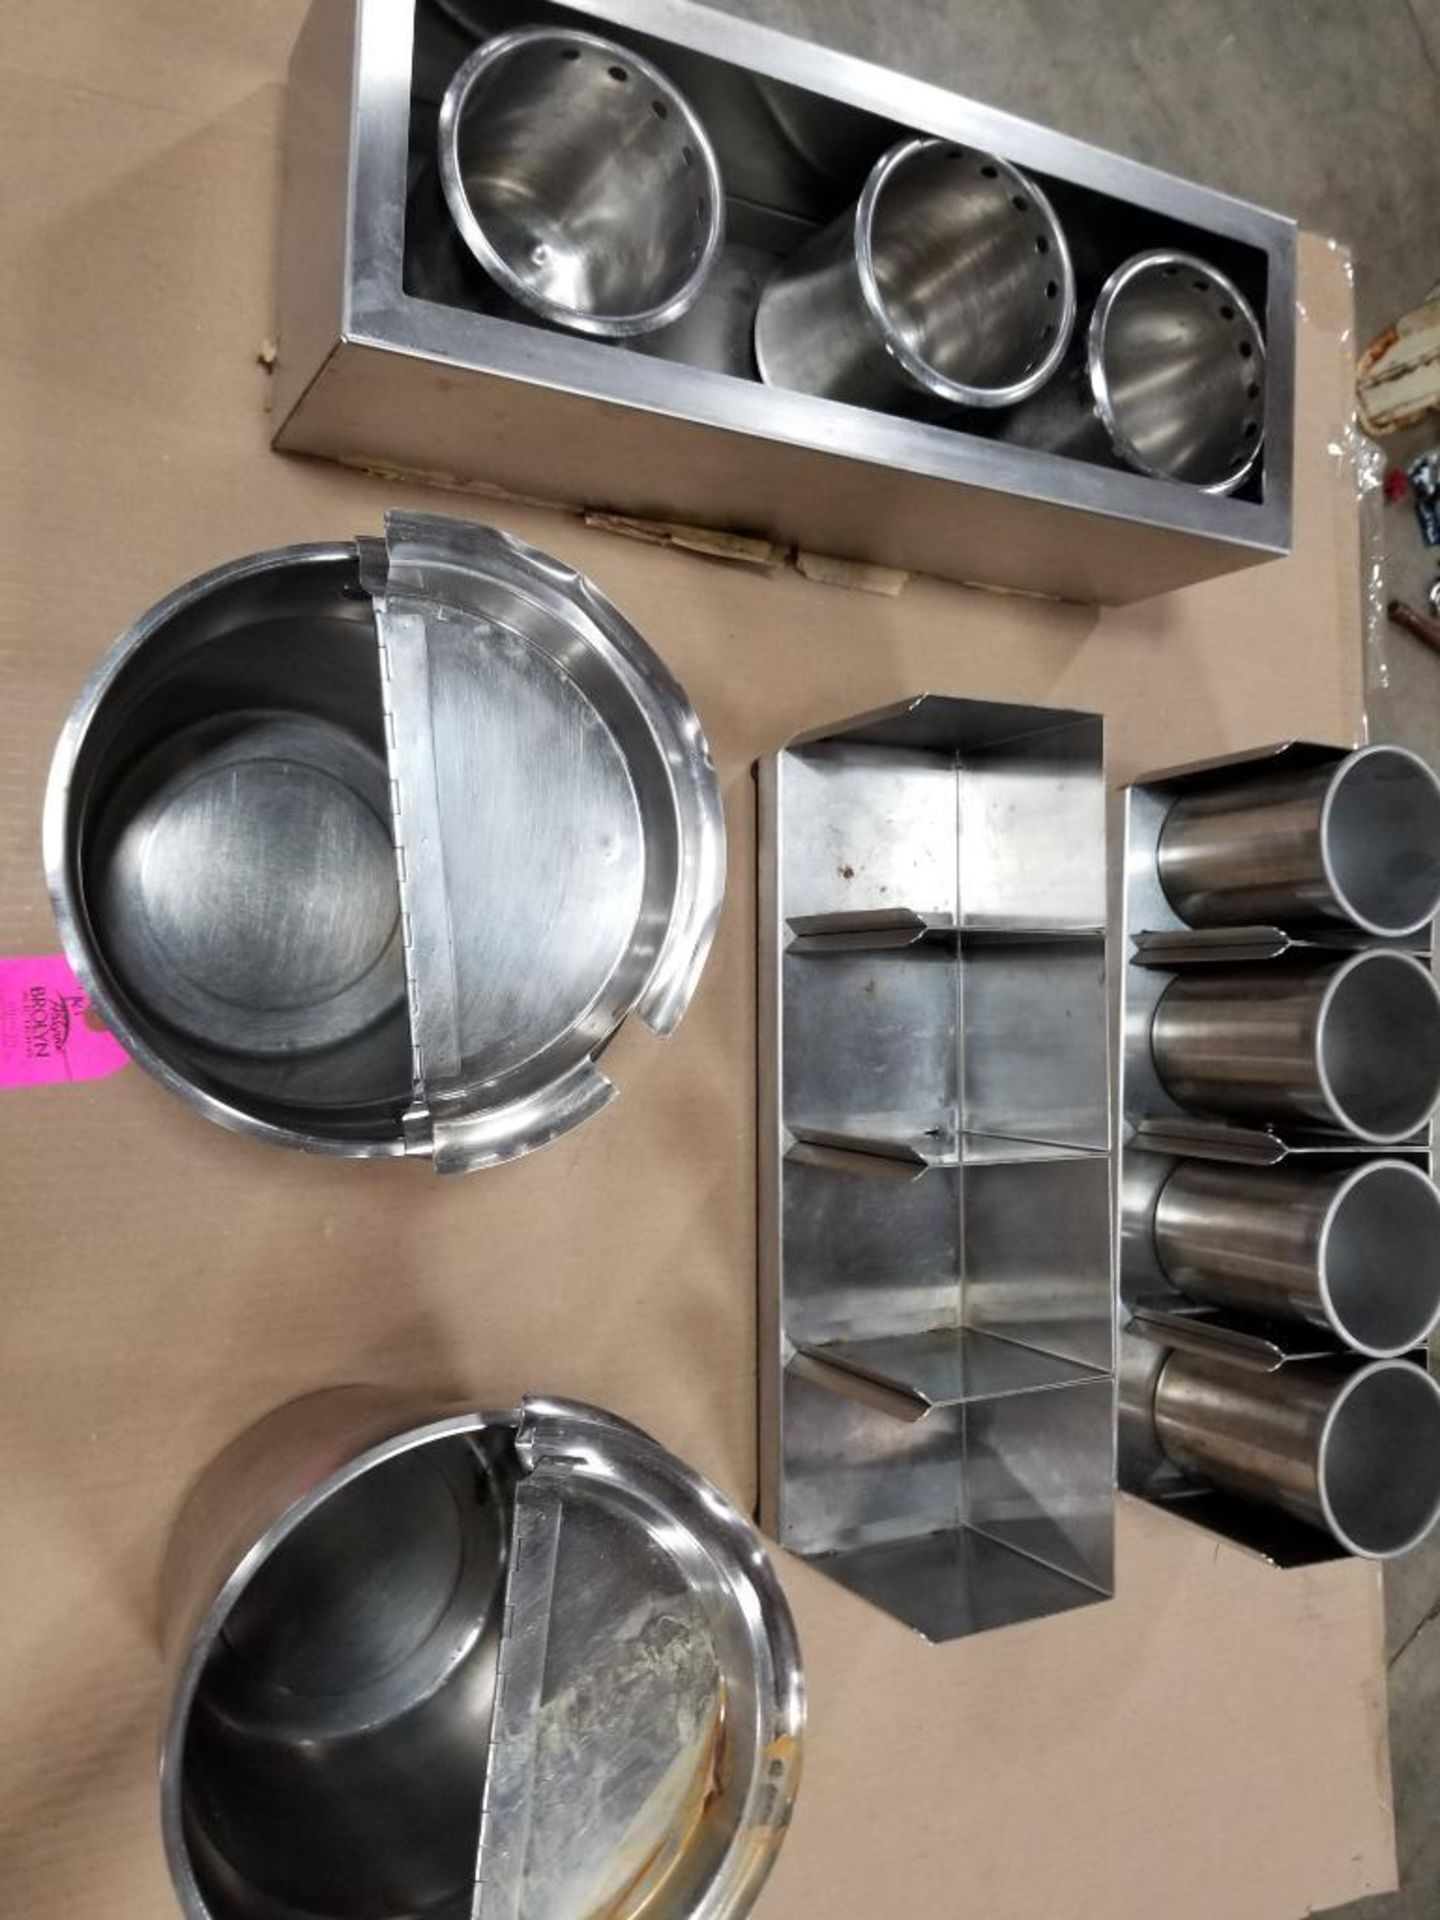 Stainless steel steam table and containers.